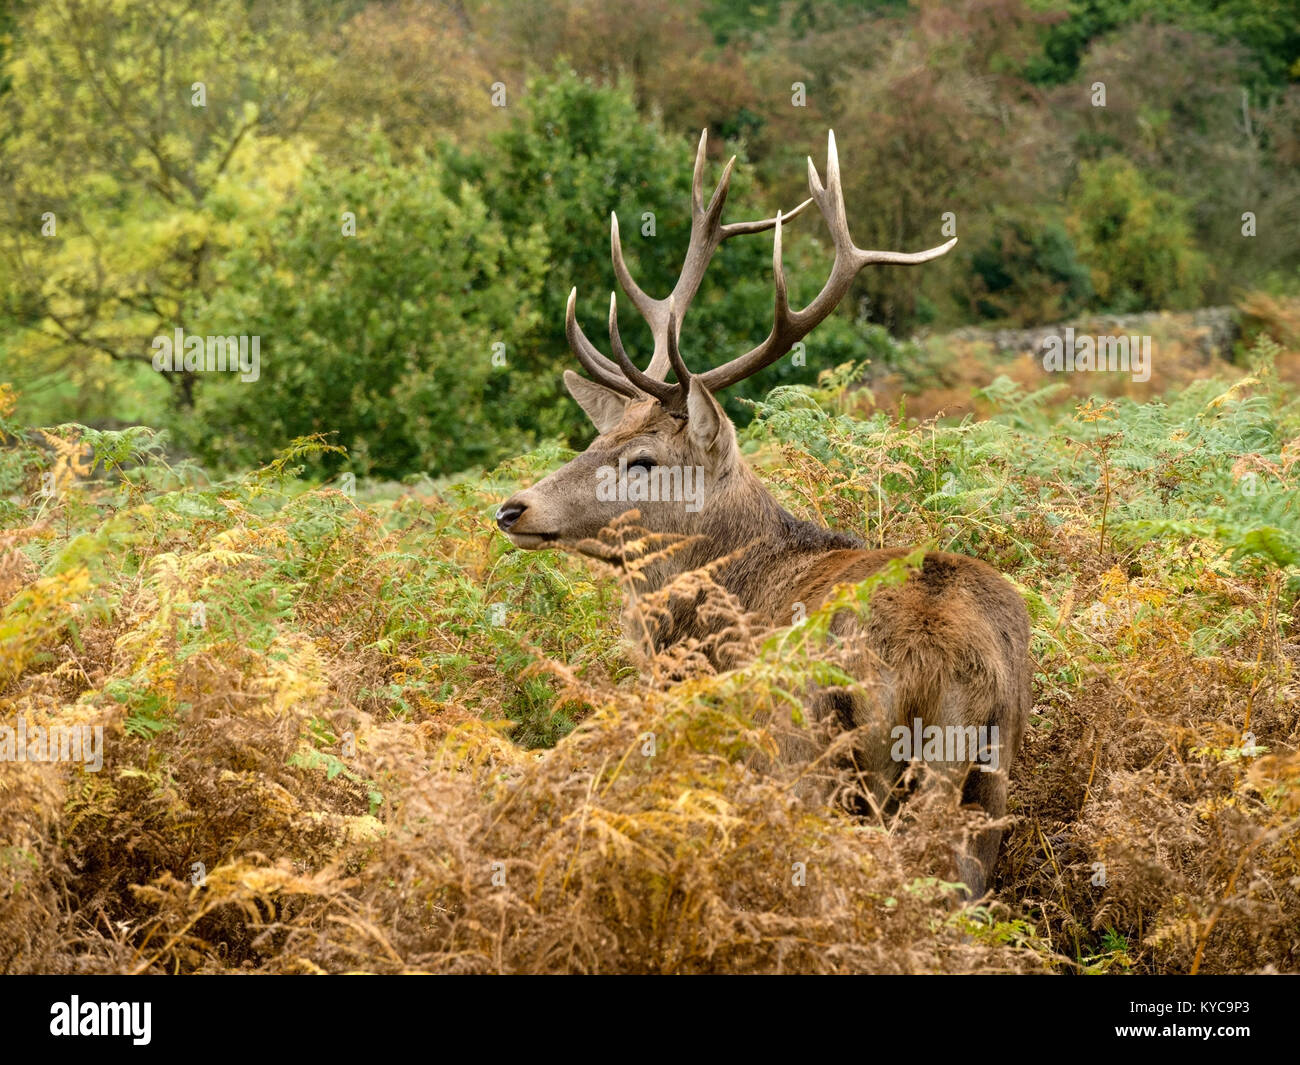 Single large adult male Red Deer Stag (Cervus elaphus) with antlers amongst tall bracken in Charnwood Forest, Leicestershire, England, UK Stock Photo